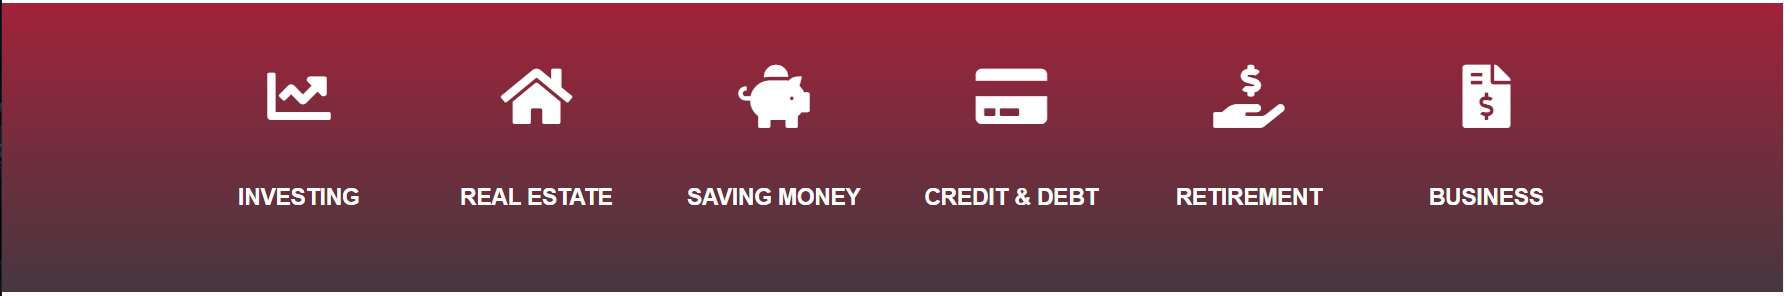 An infographic banner with icons representing various financial concepts, including investing, real estate, saving money, credit & debt, retirement, and business.